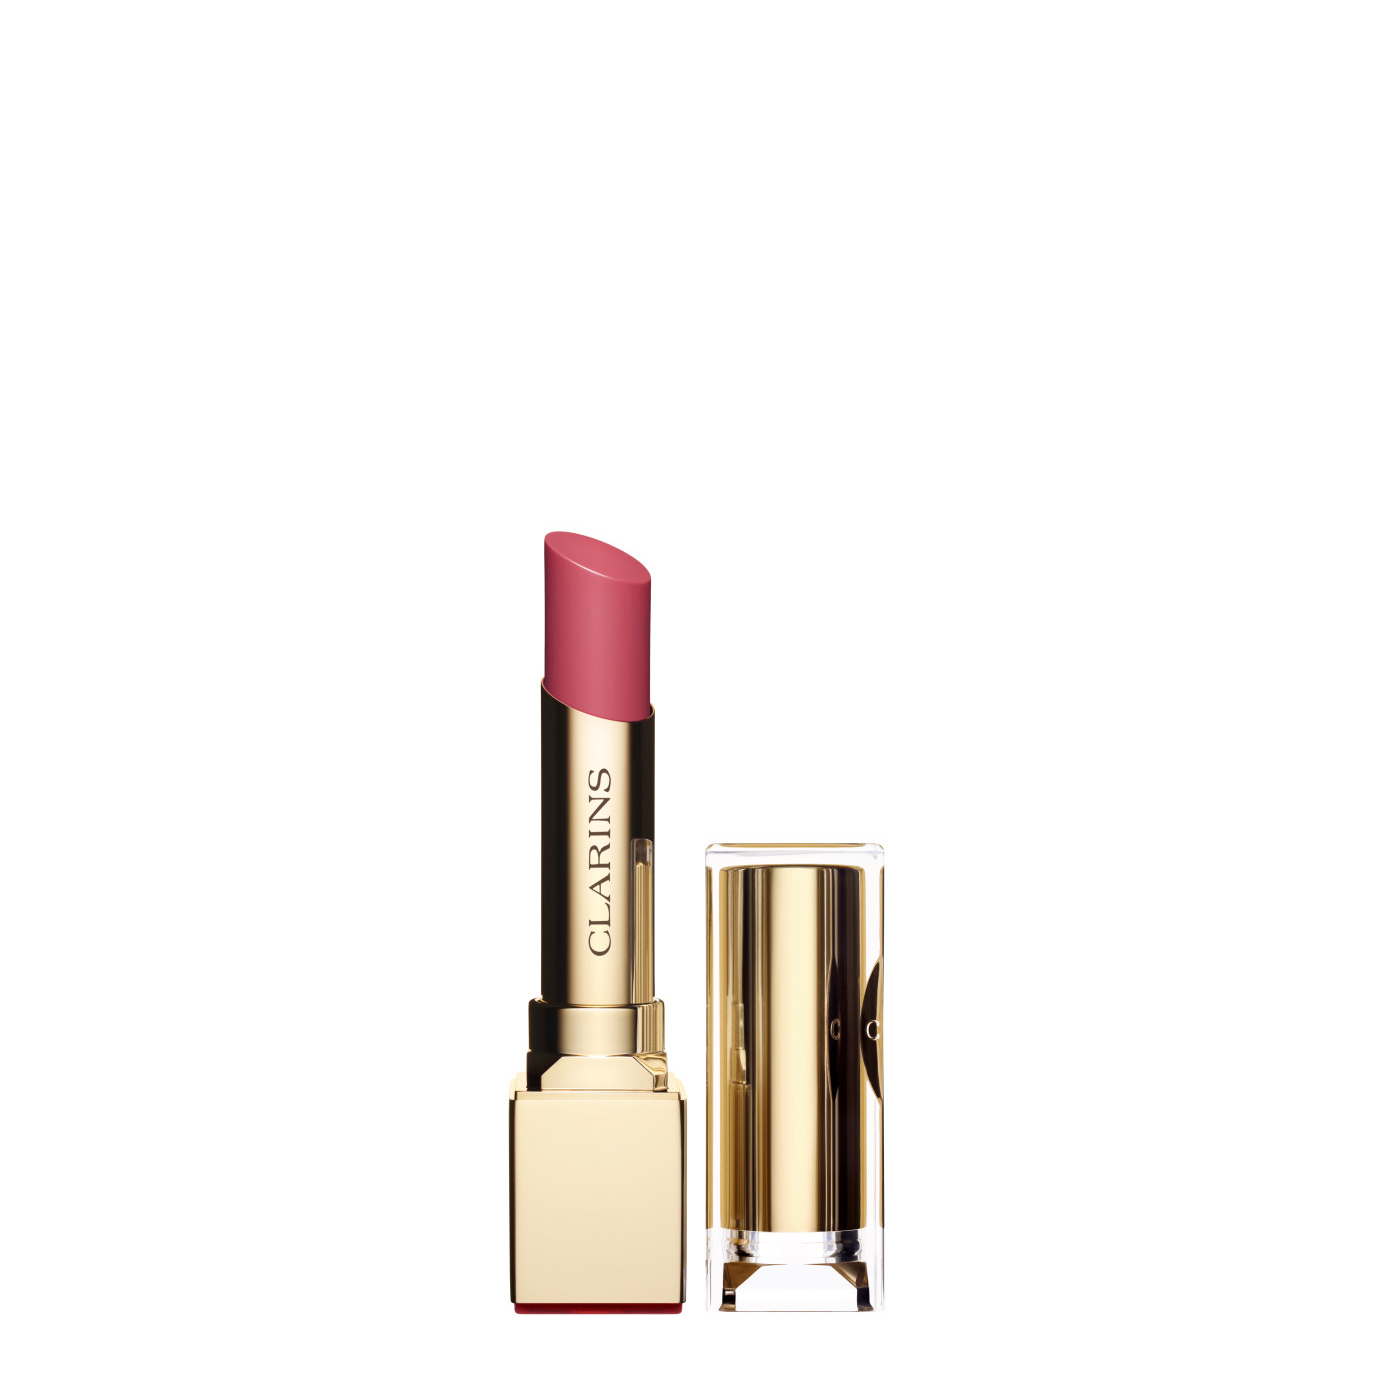 CLARINS ROUGE ECLAT 25 PINK BLOSSOM 3 GR @ 